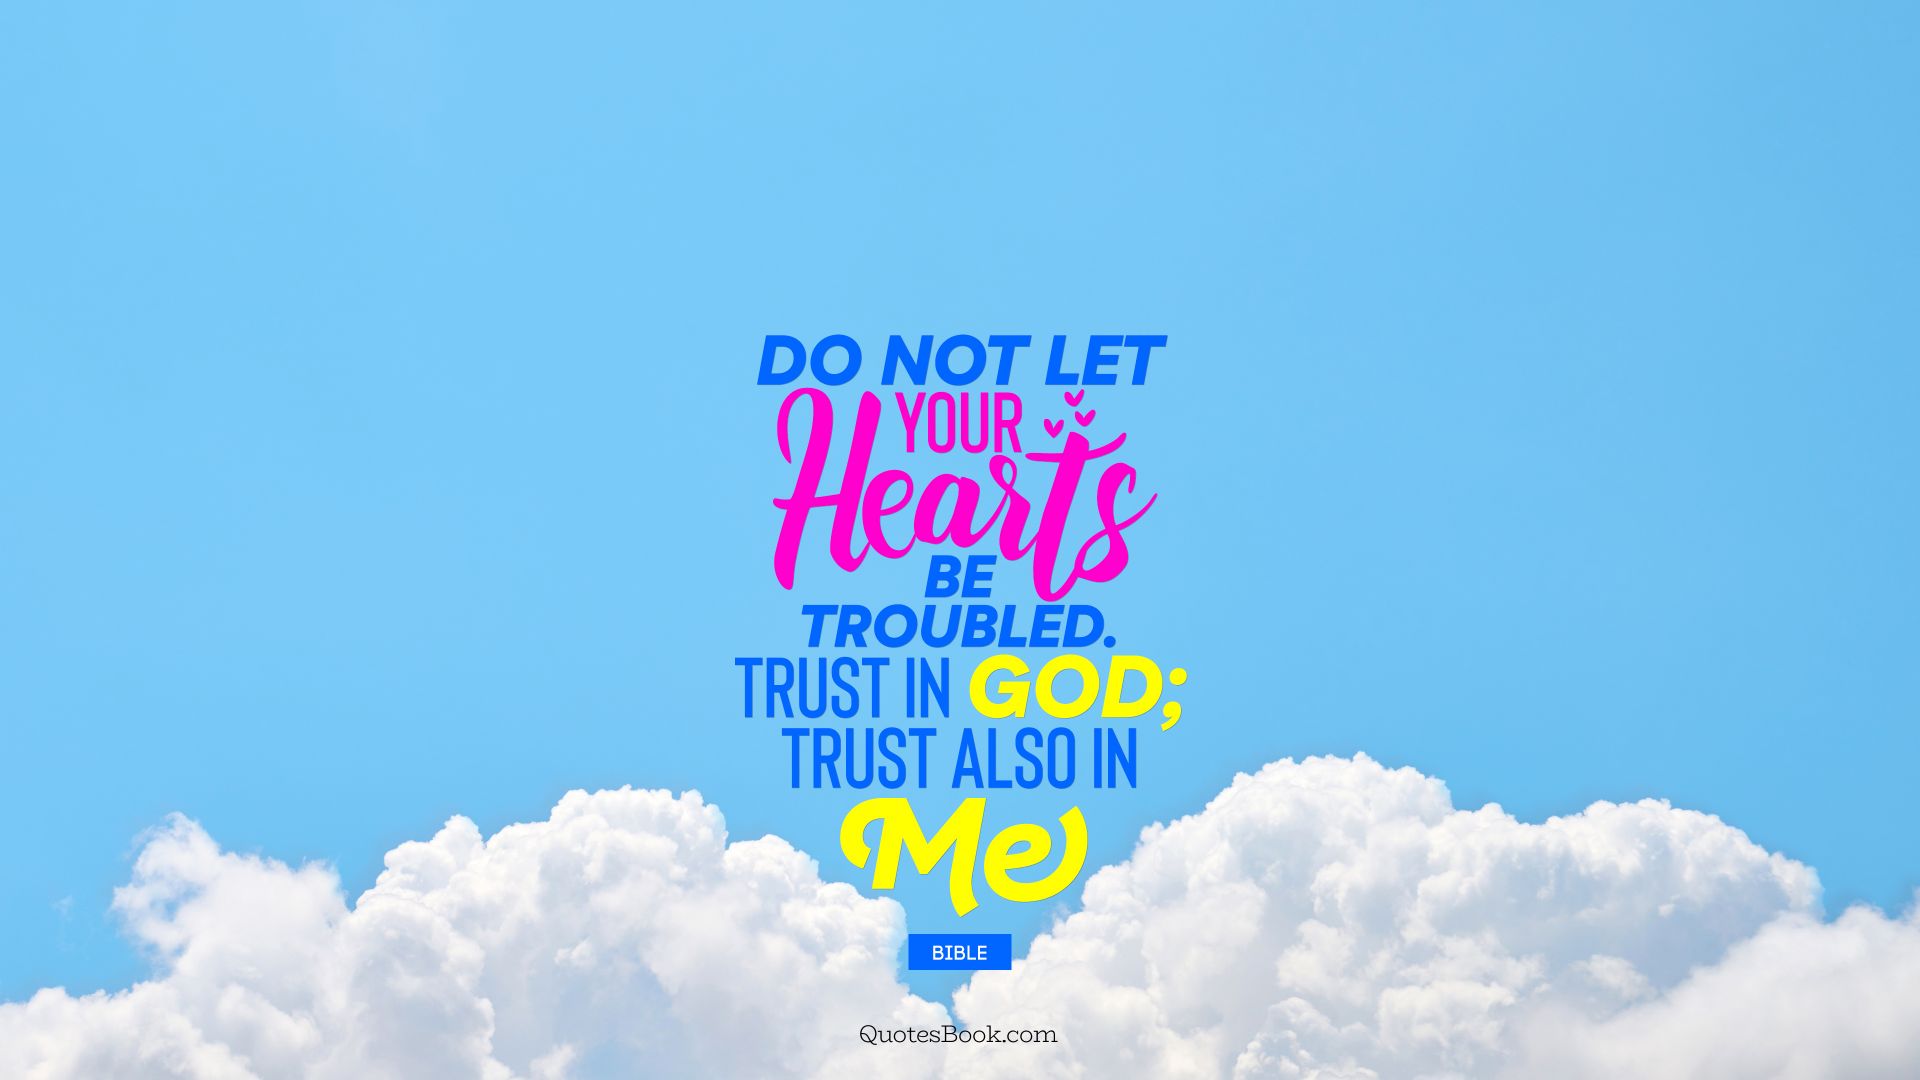 Do not let your hearts be troubled. Trust in God; trust also in me. - Quote by Bible